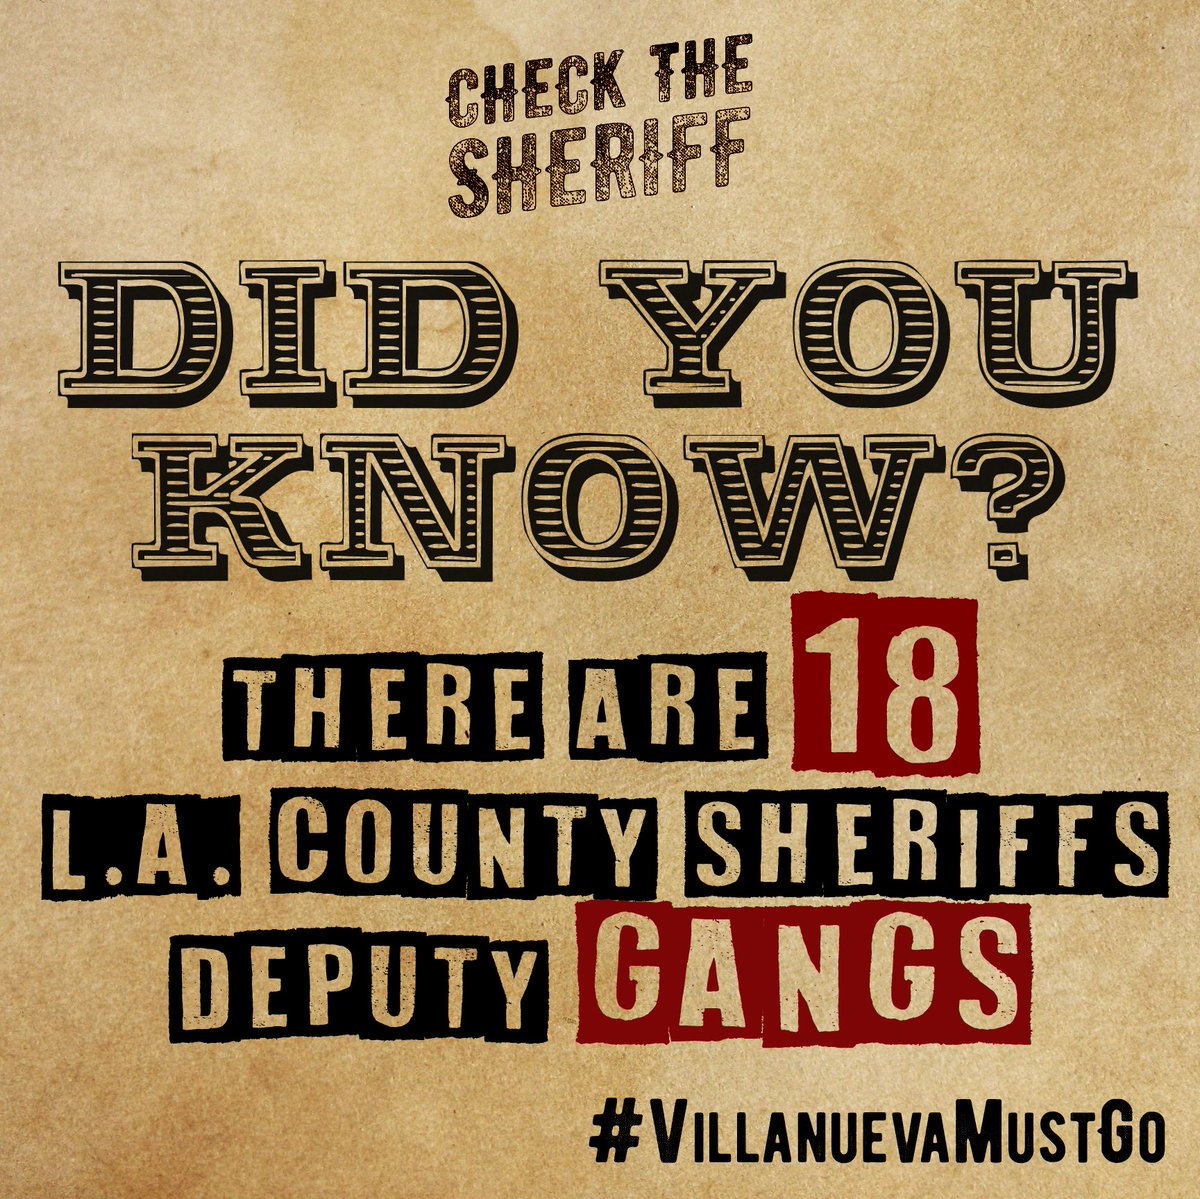 The most dangerous gangs in L.A. are within the L.A. County Sheriff’s Department. #LASDGangs
 
Sheriff Alex 'Trump of L.A.' Villanueva has enabled deputy gangs to kill Black and Latinx community members with impunity and harass their grieving family members.
 
#VillanuevaMustGo